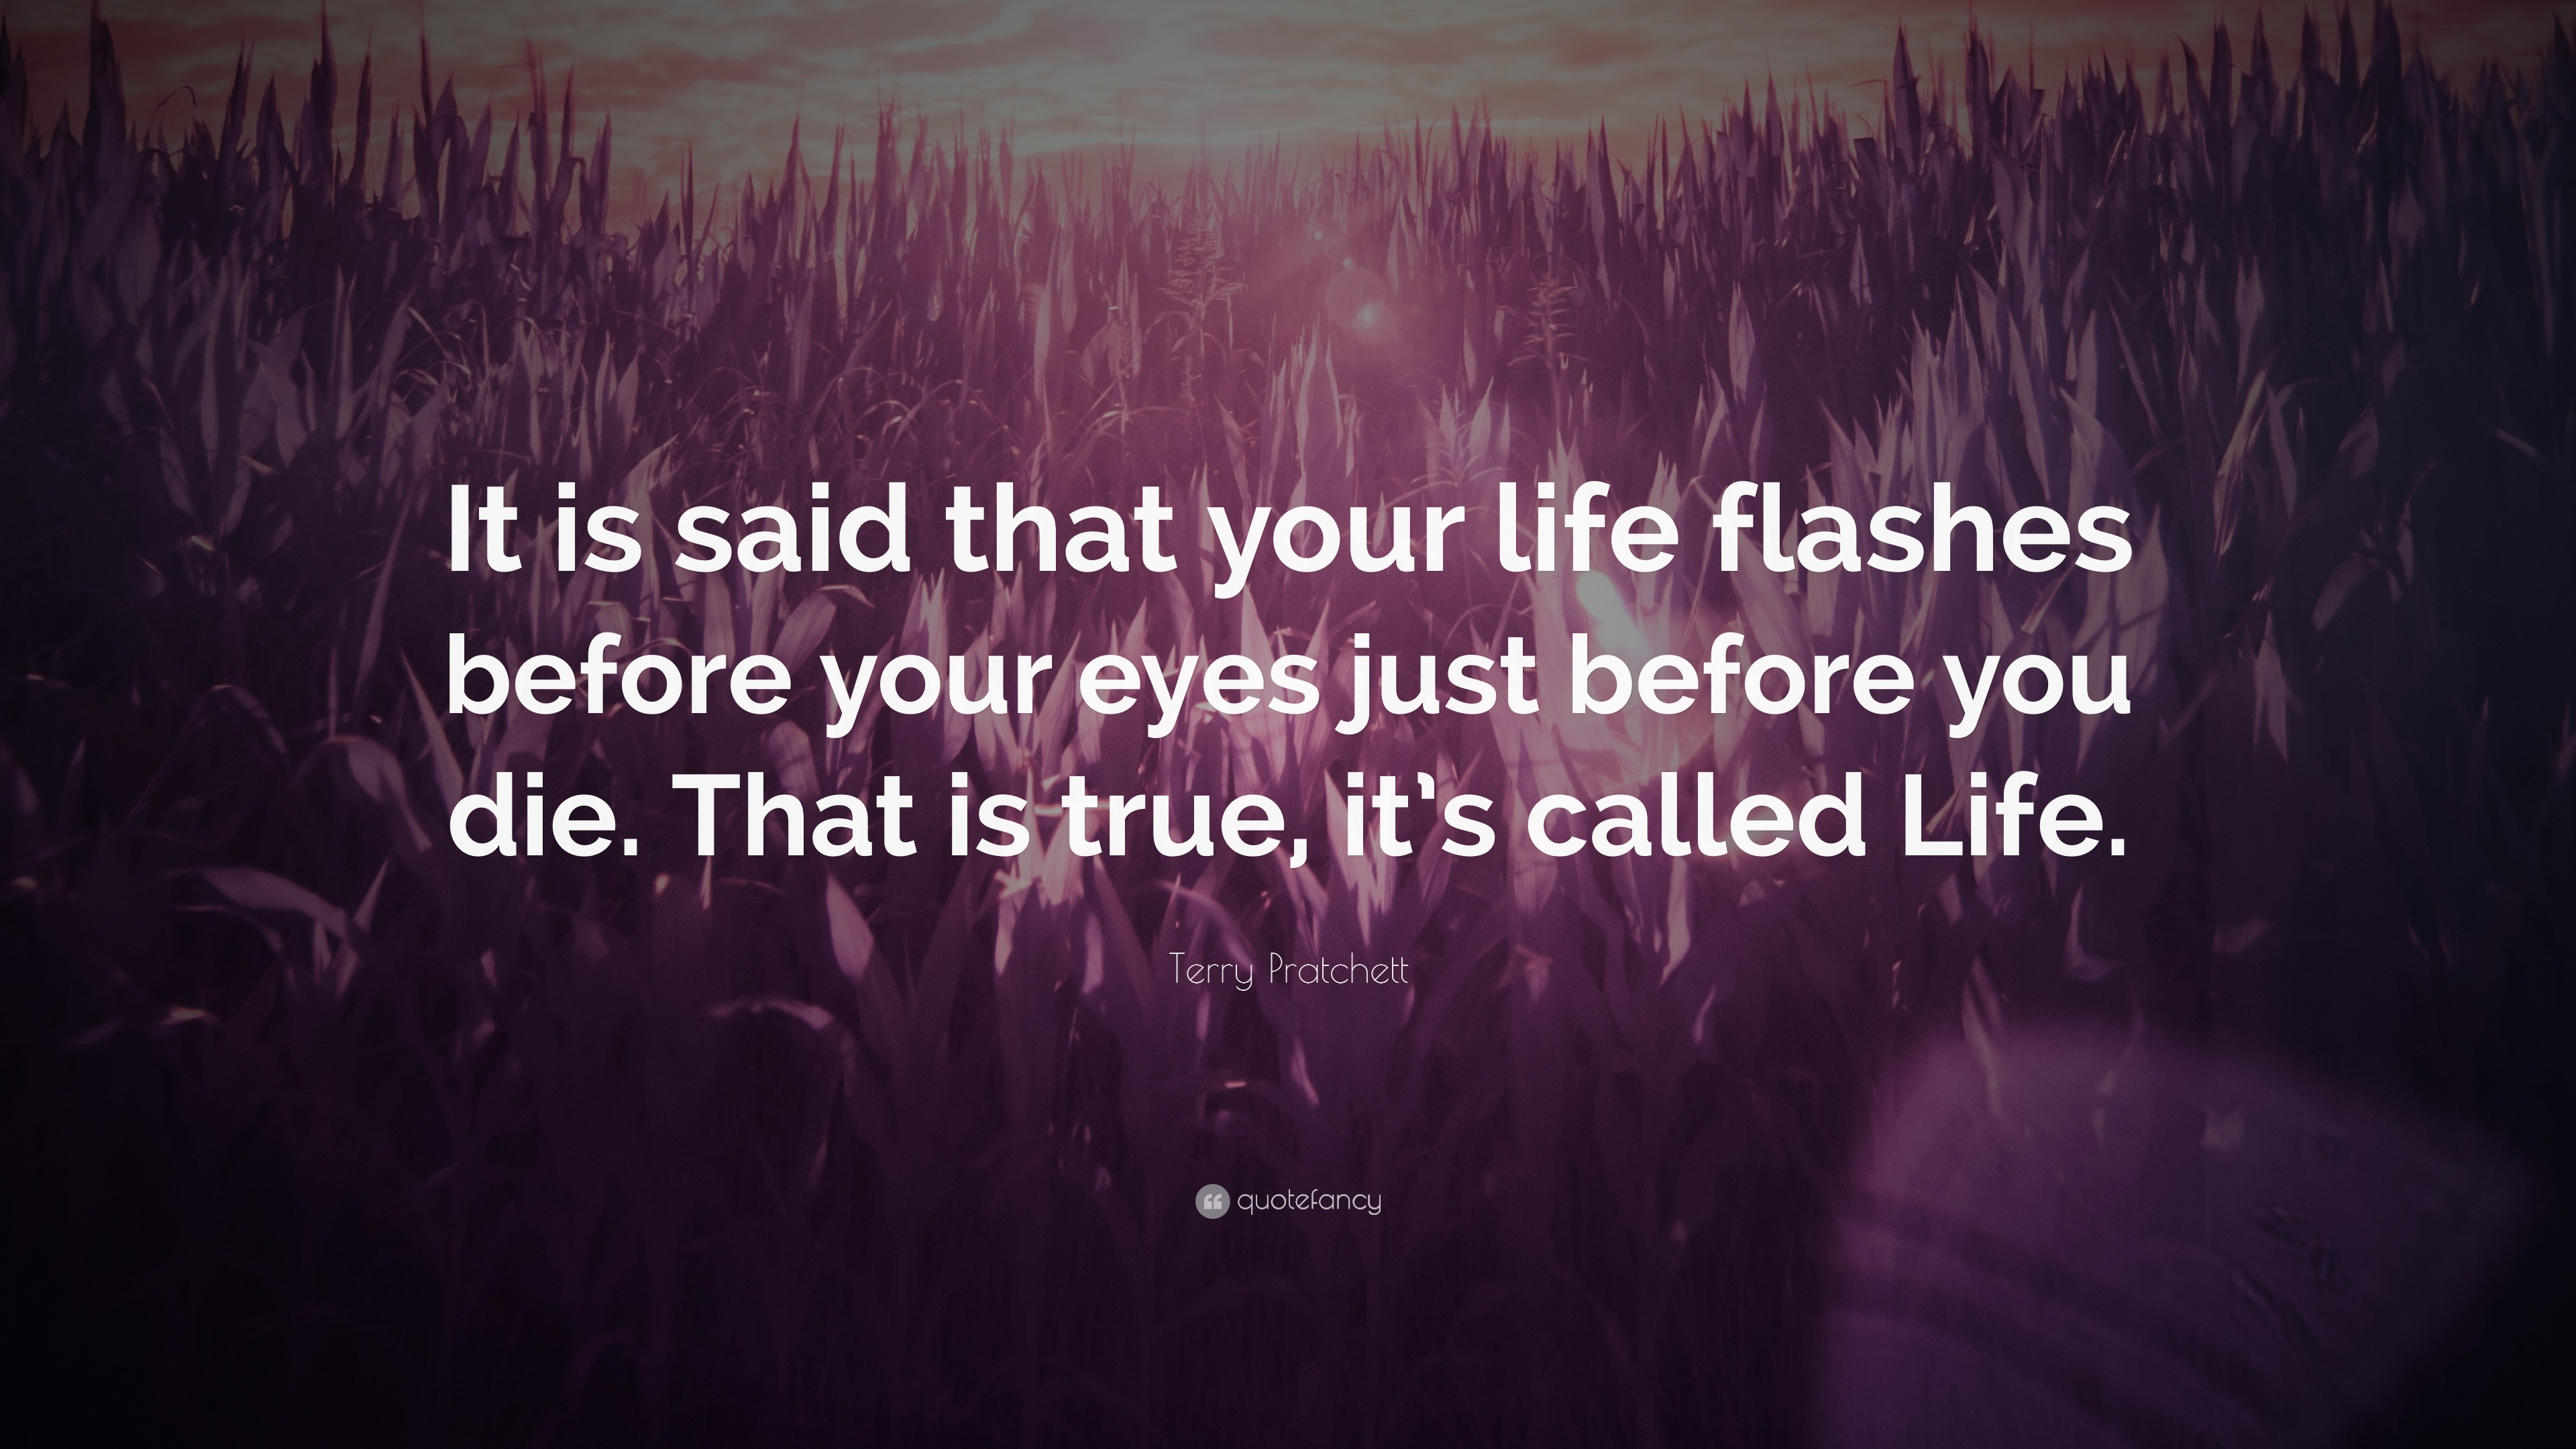 Here's how your life flashes before your eyes, according to these